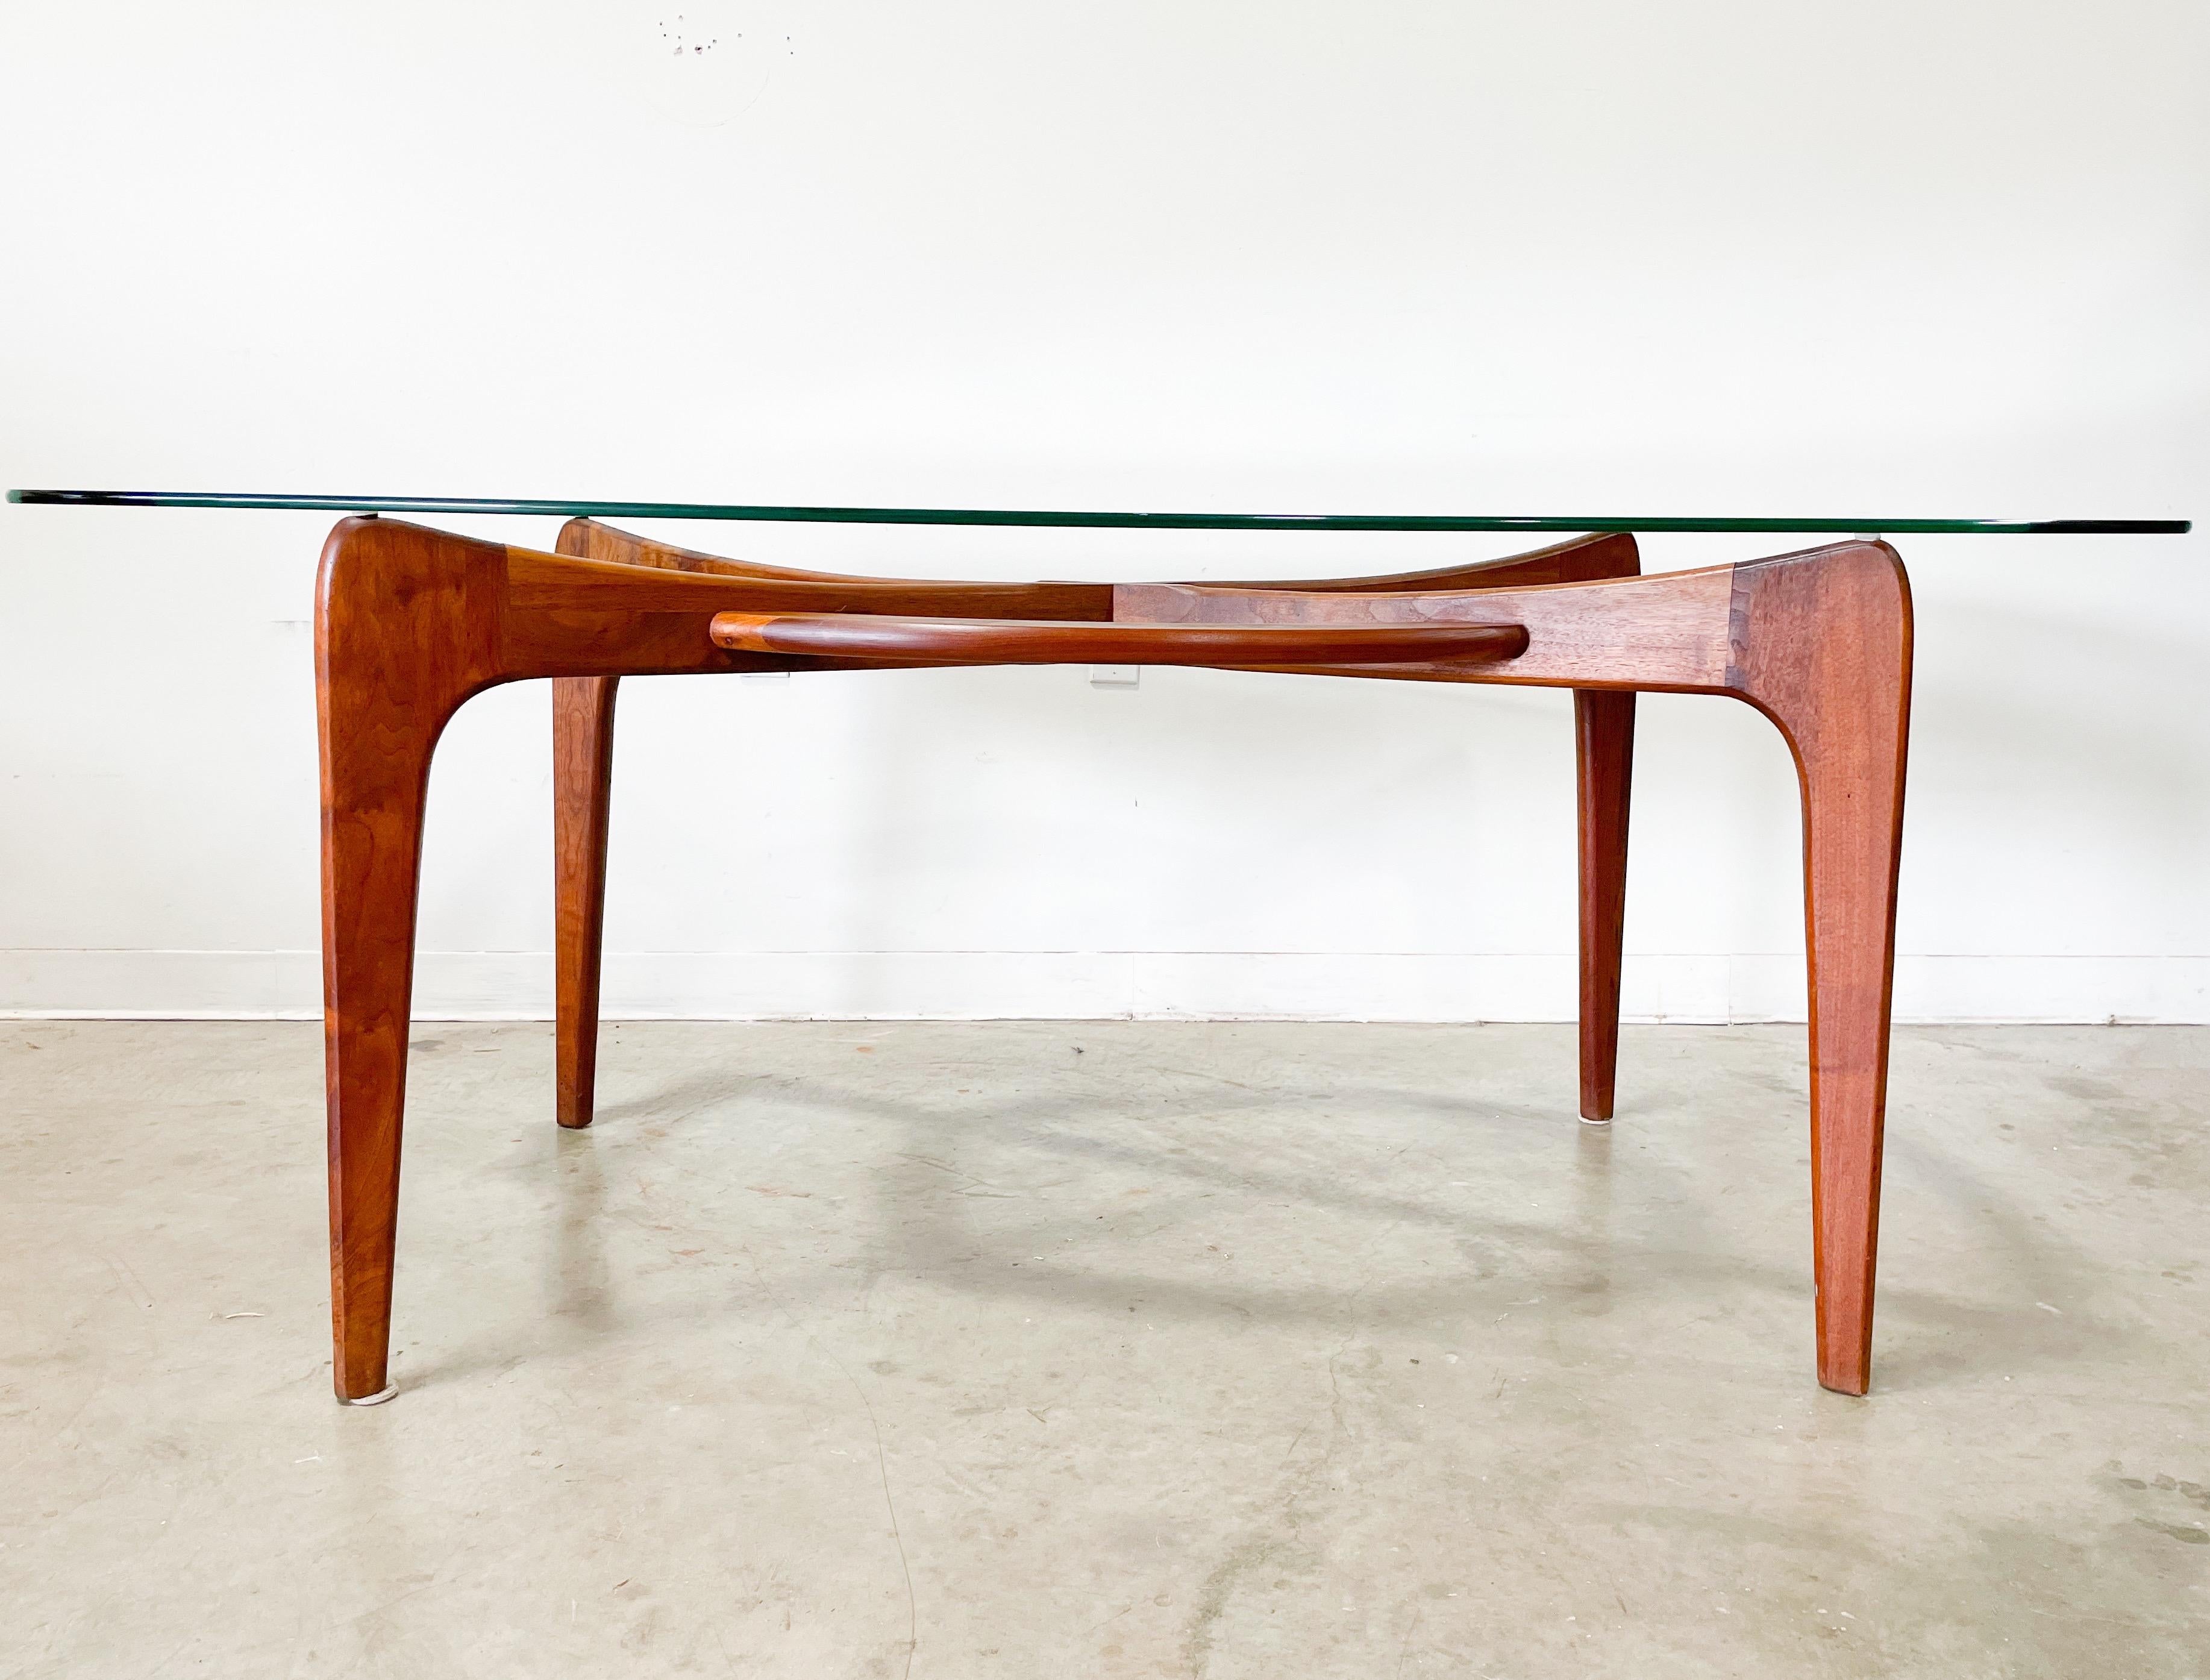 Vintage Mid-Century Modern dining table designed by Adrian Pearsall for his company Craft Associates in the 1960s. Beautifully sculpted solid walnut frame and distinctive boat shaped top. Frame has gorgeous wood grain and is very sturdy. Top is in